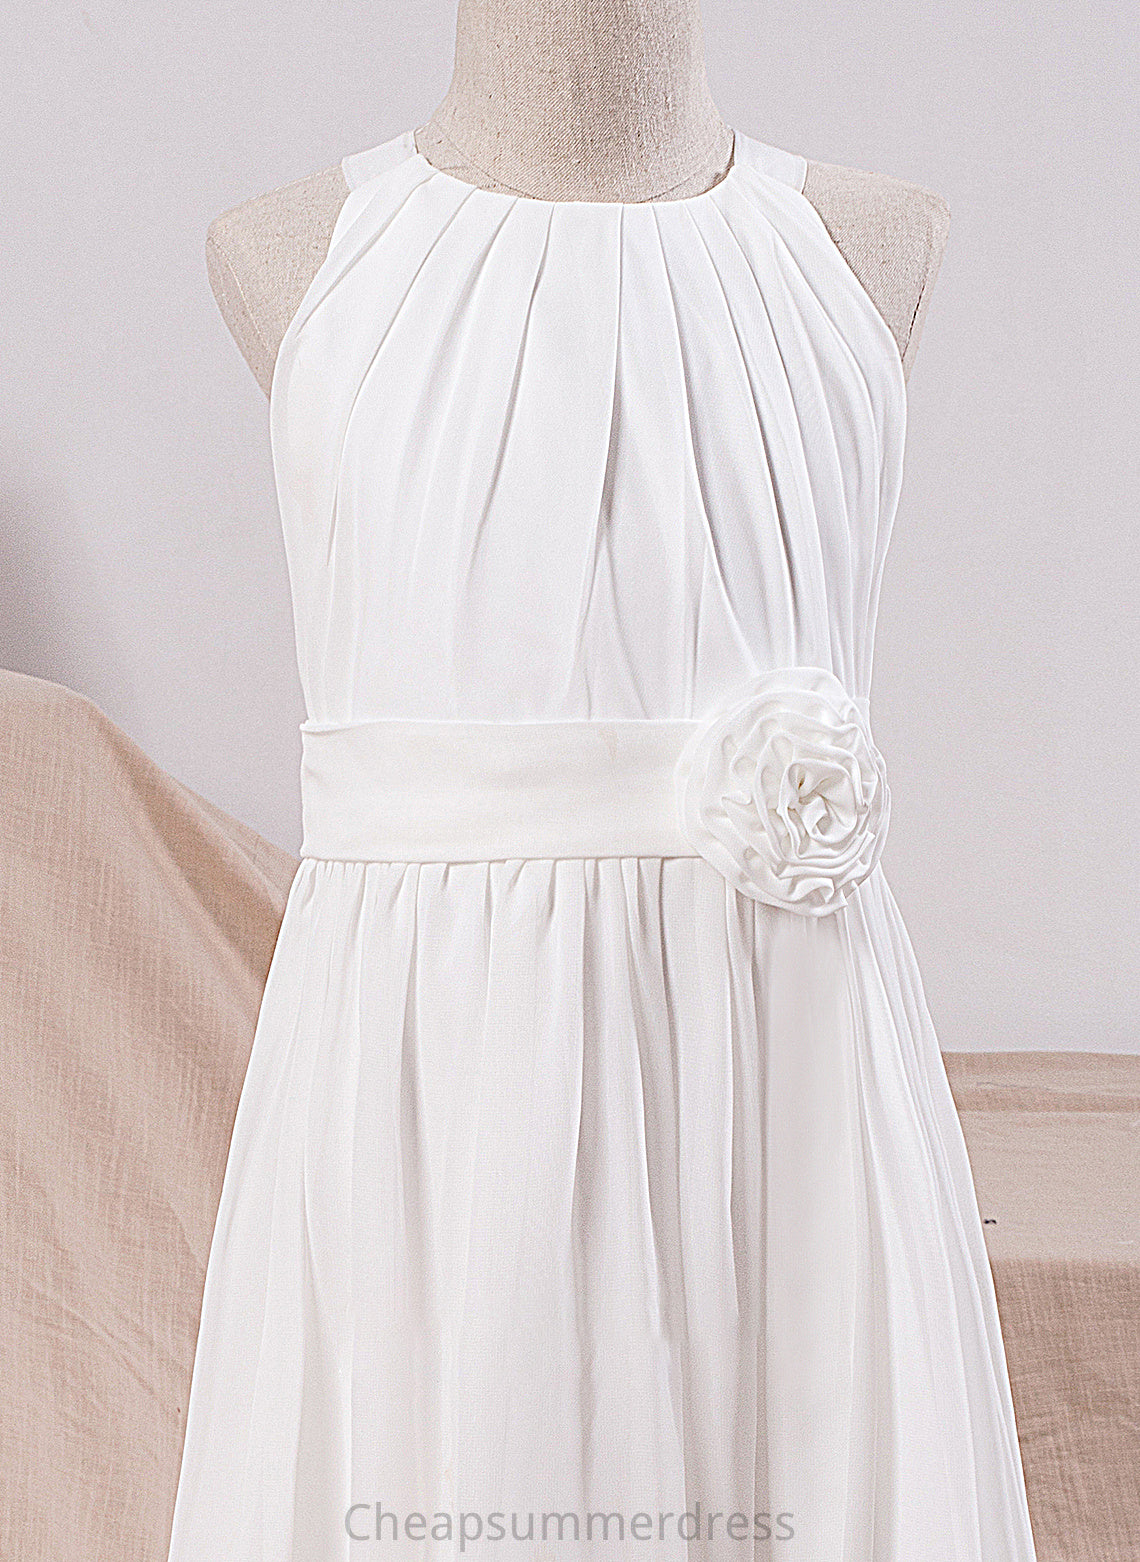 Scoop With Junior Bridesmaid Dresses Chiffon Neck Ankle-Length Flower(s) A-Line Micah